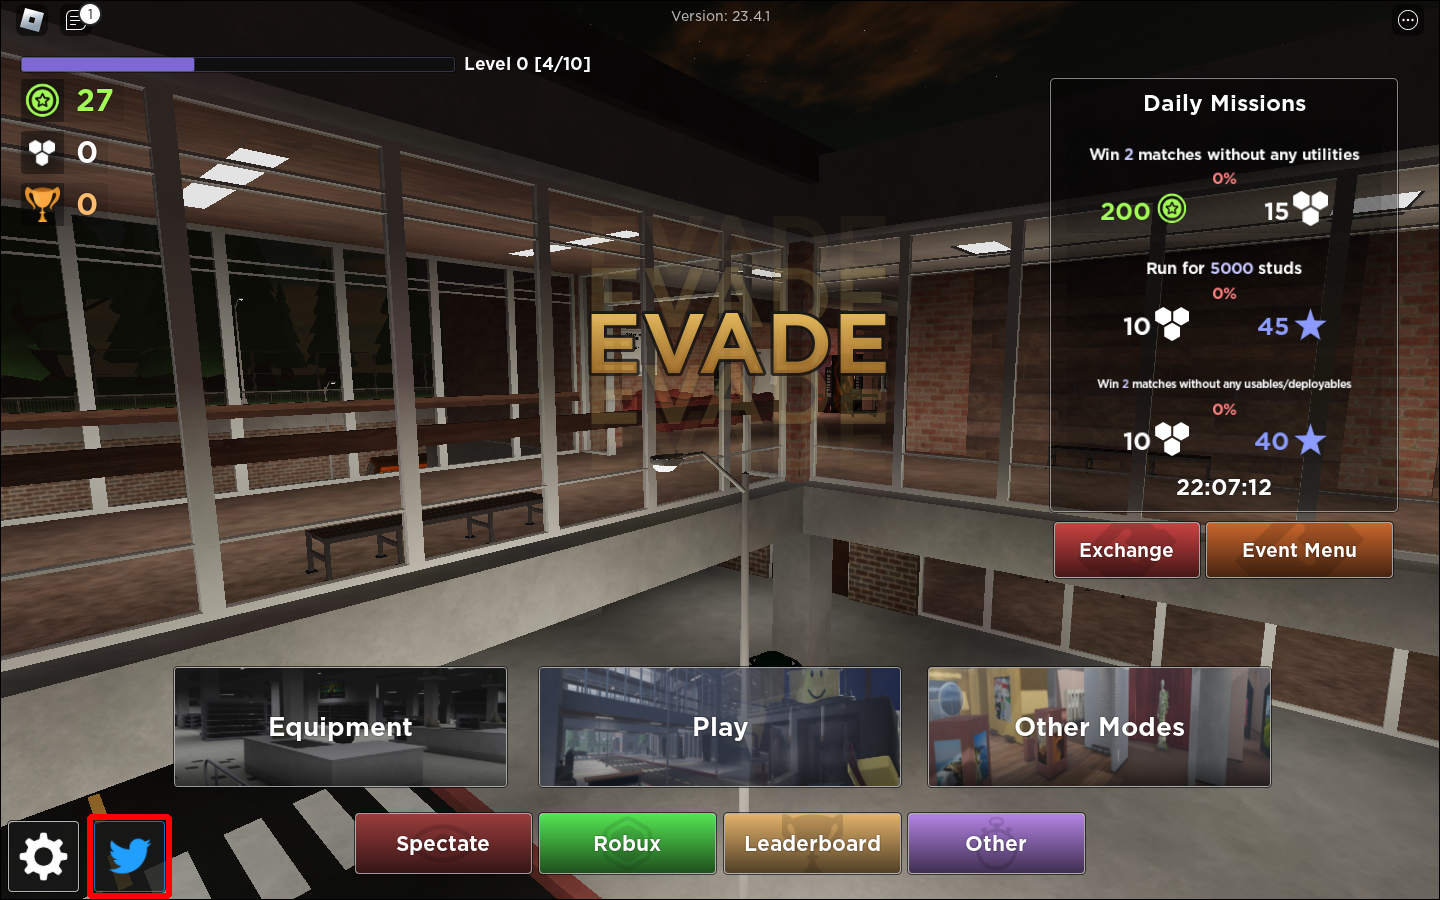 Roblox: All Evade codes and how to use them (Updated March 2023) - The Click